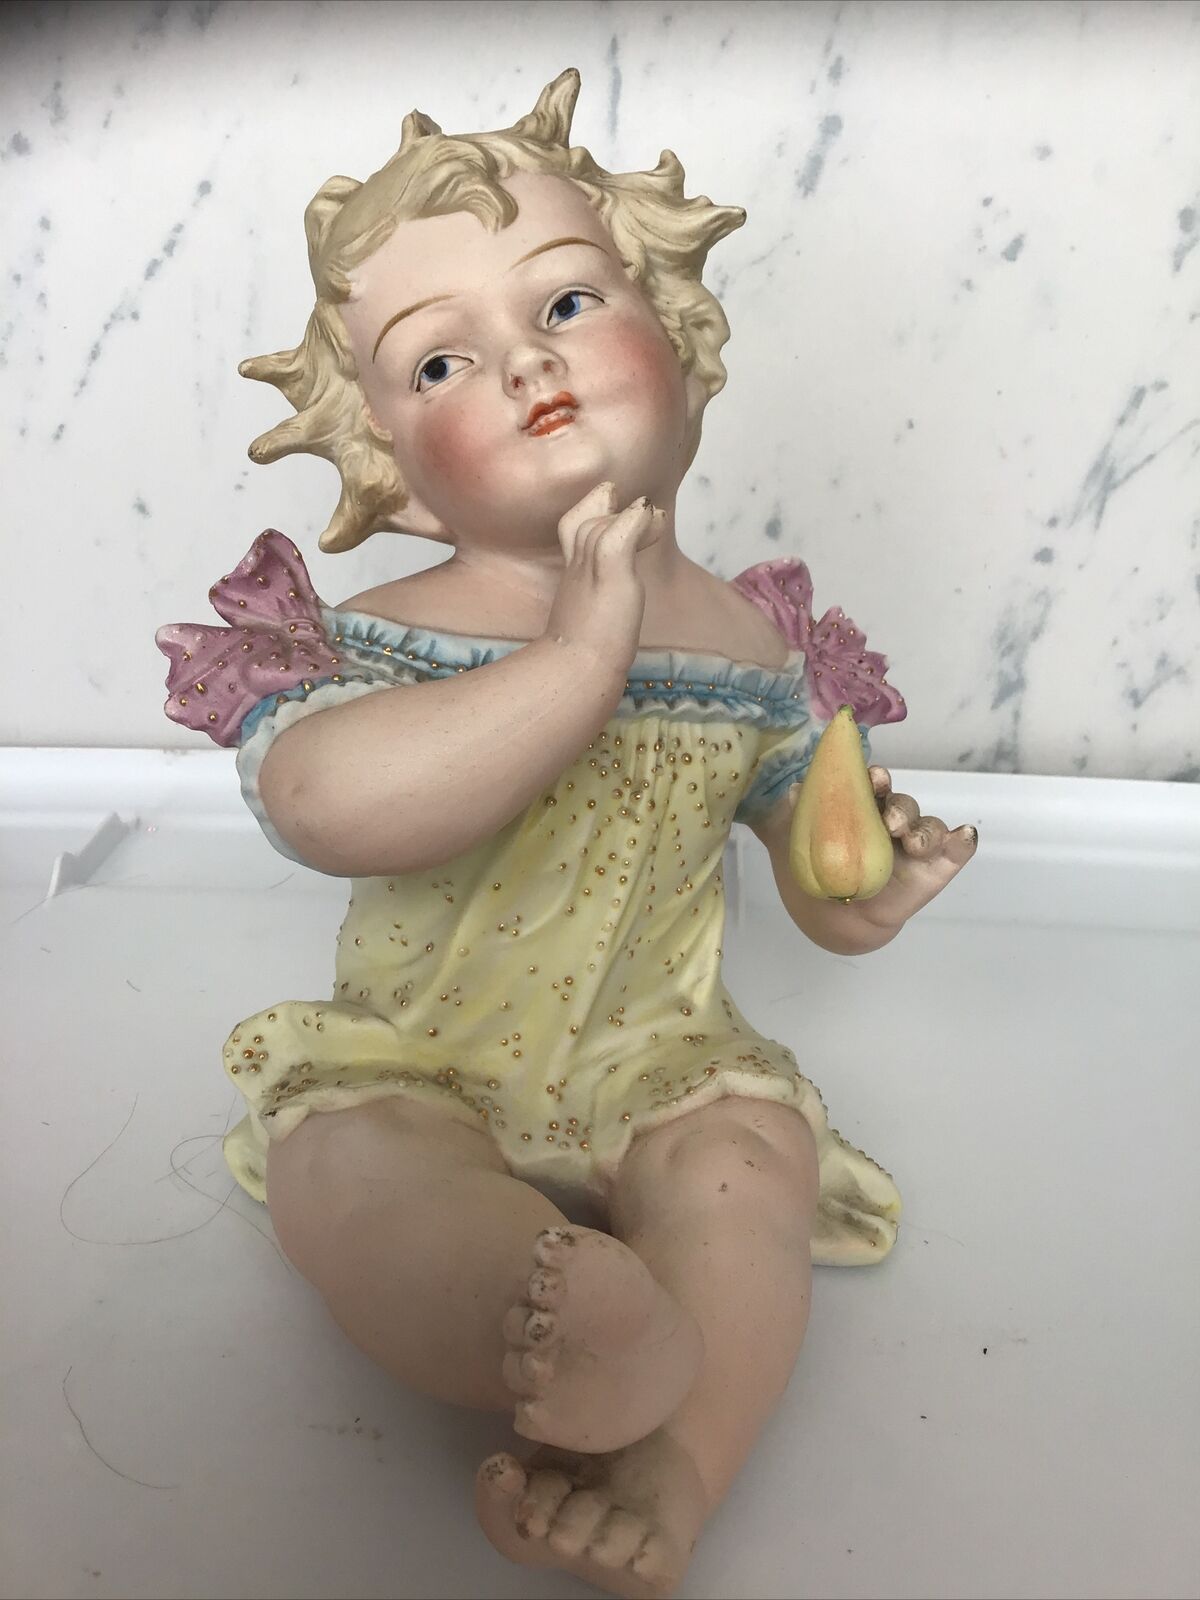 Antique Conta&Boehme BISQUE Porcelain PIANO Baby Figurine GIRL Holding Pear